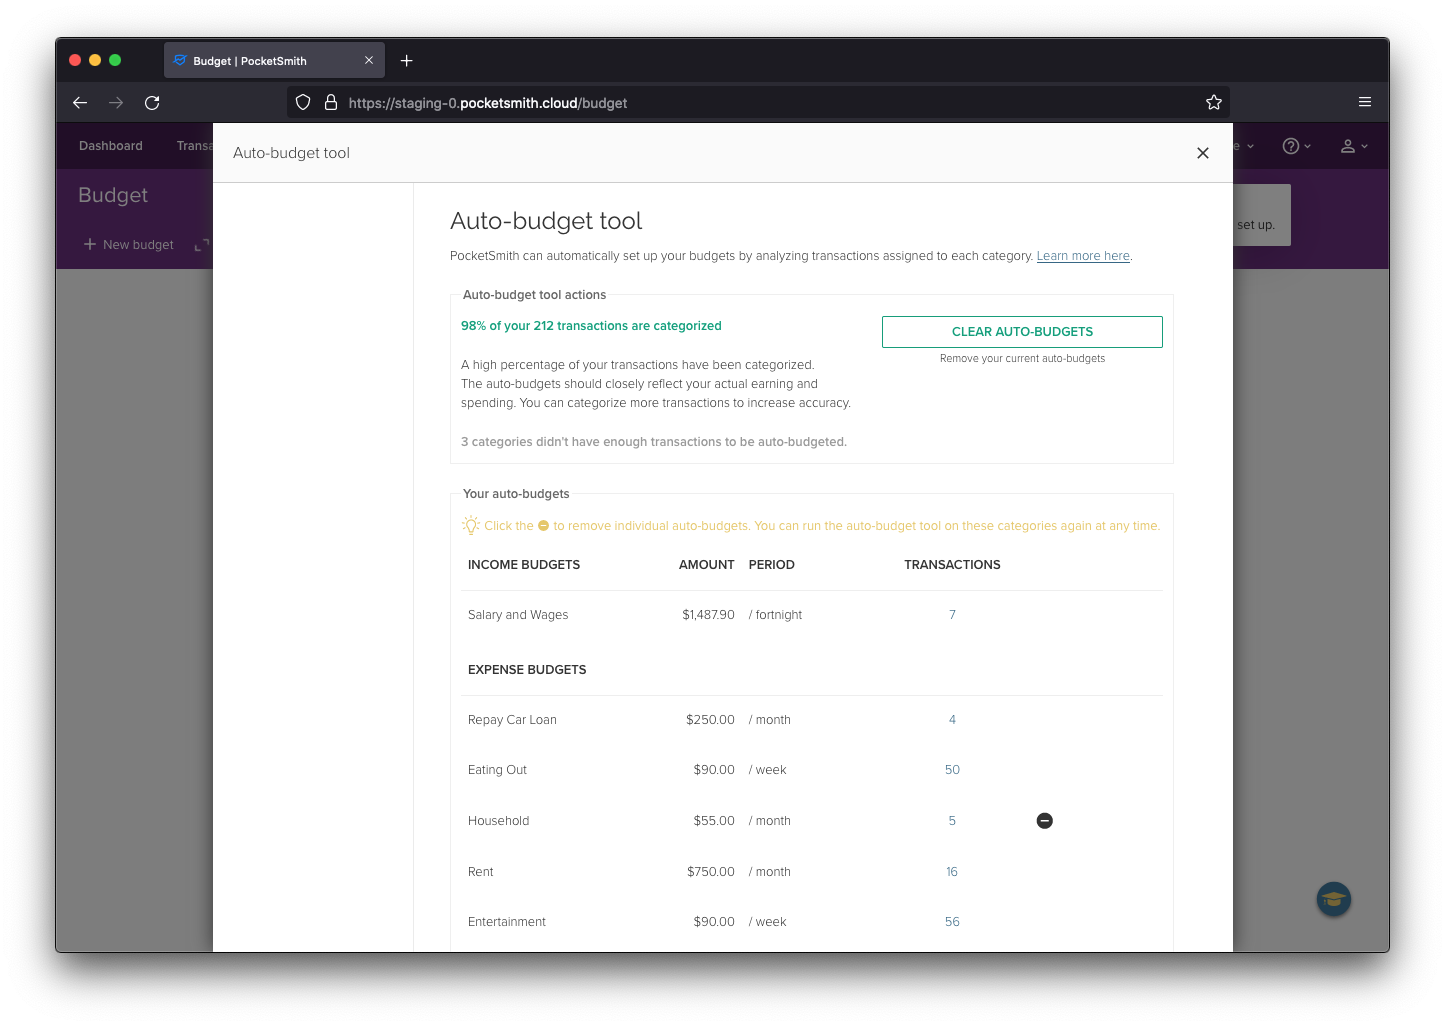 Automatically created budgets, showing the removal icon for "Household" budget